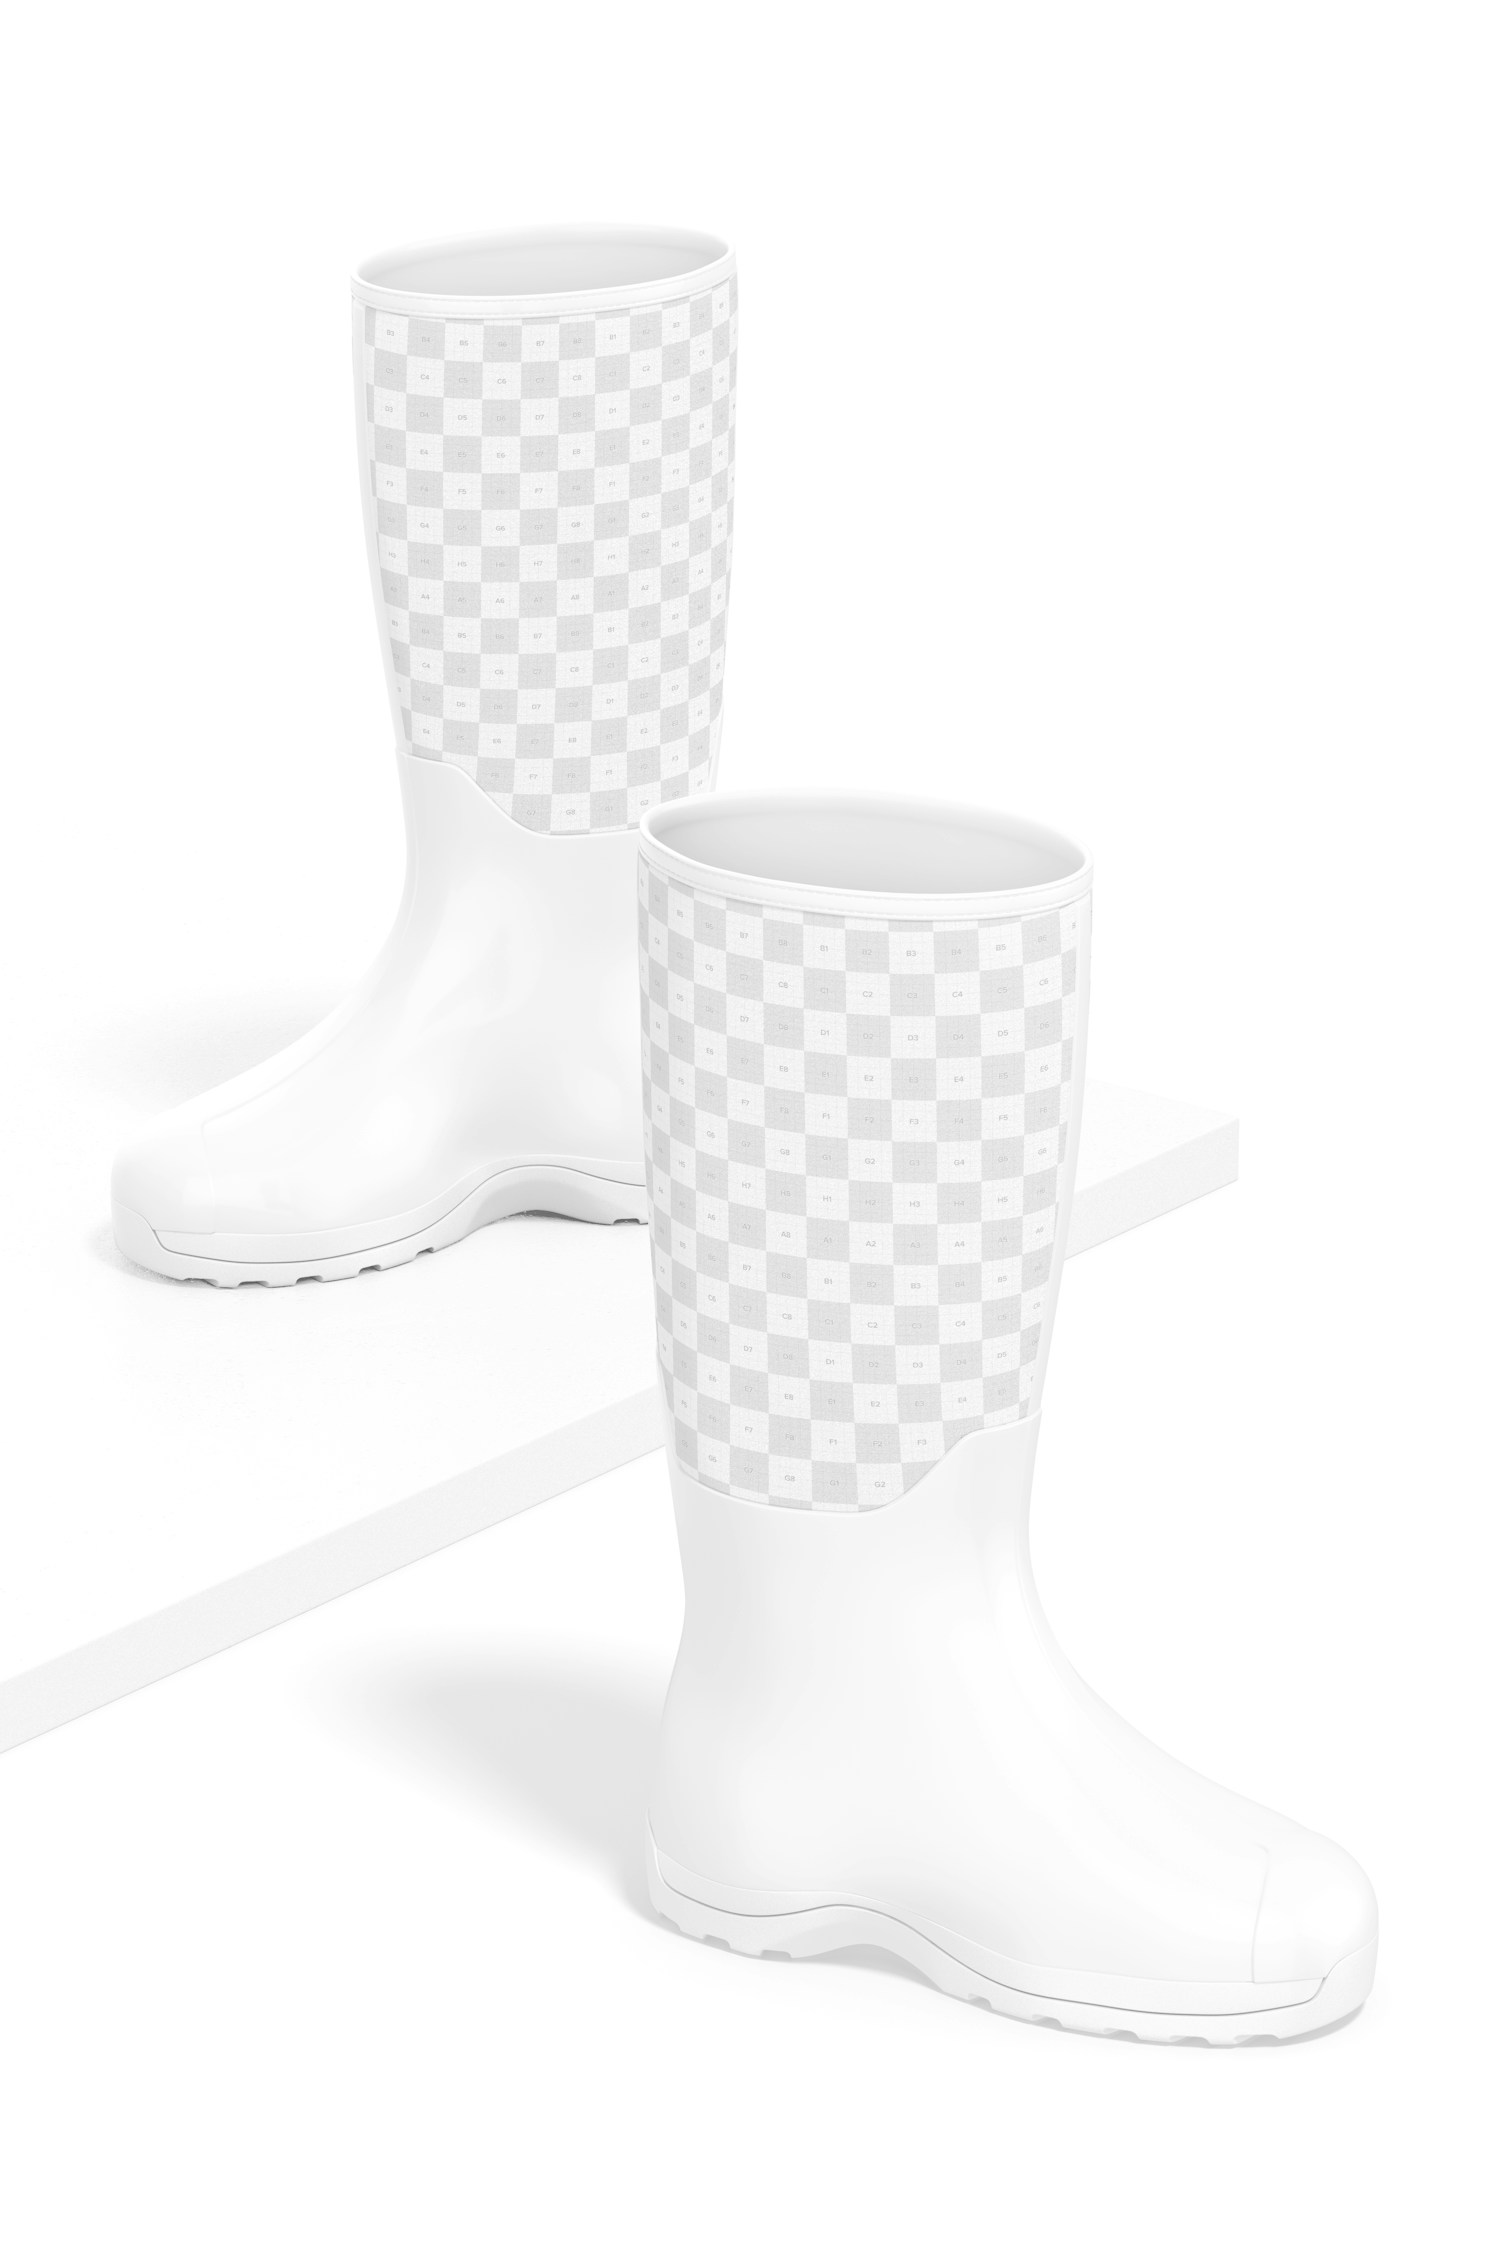 Rubber Boots Mockup, Perspective View